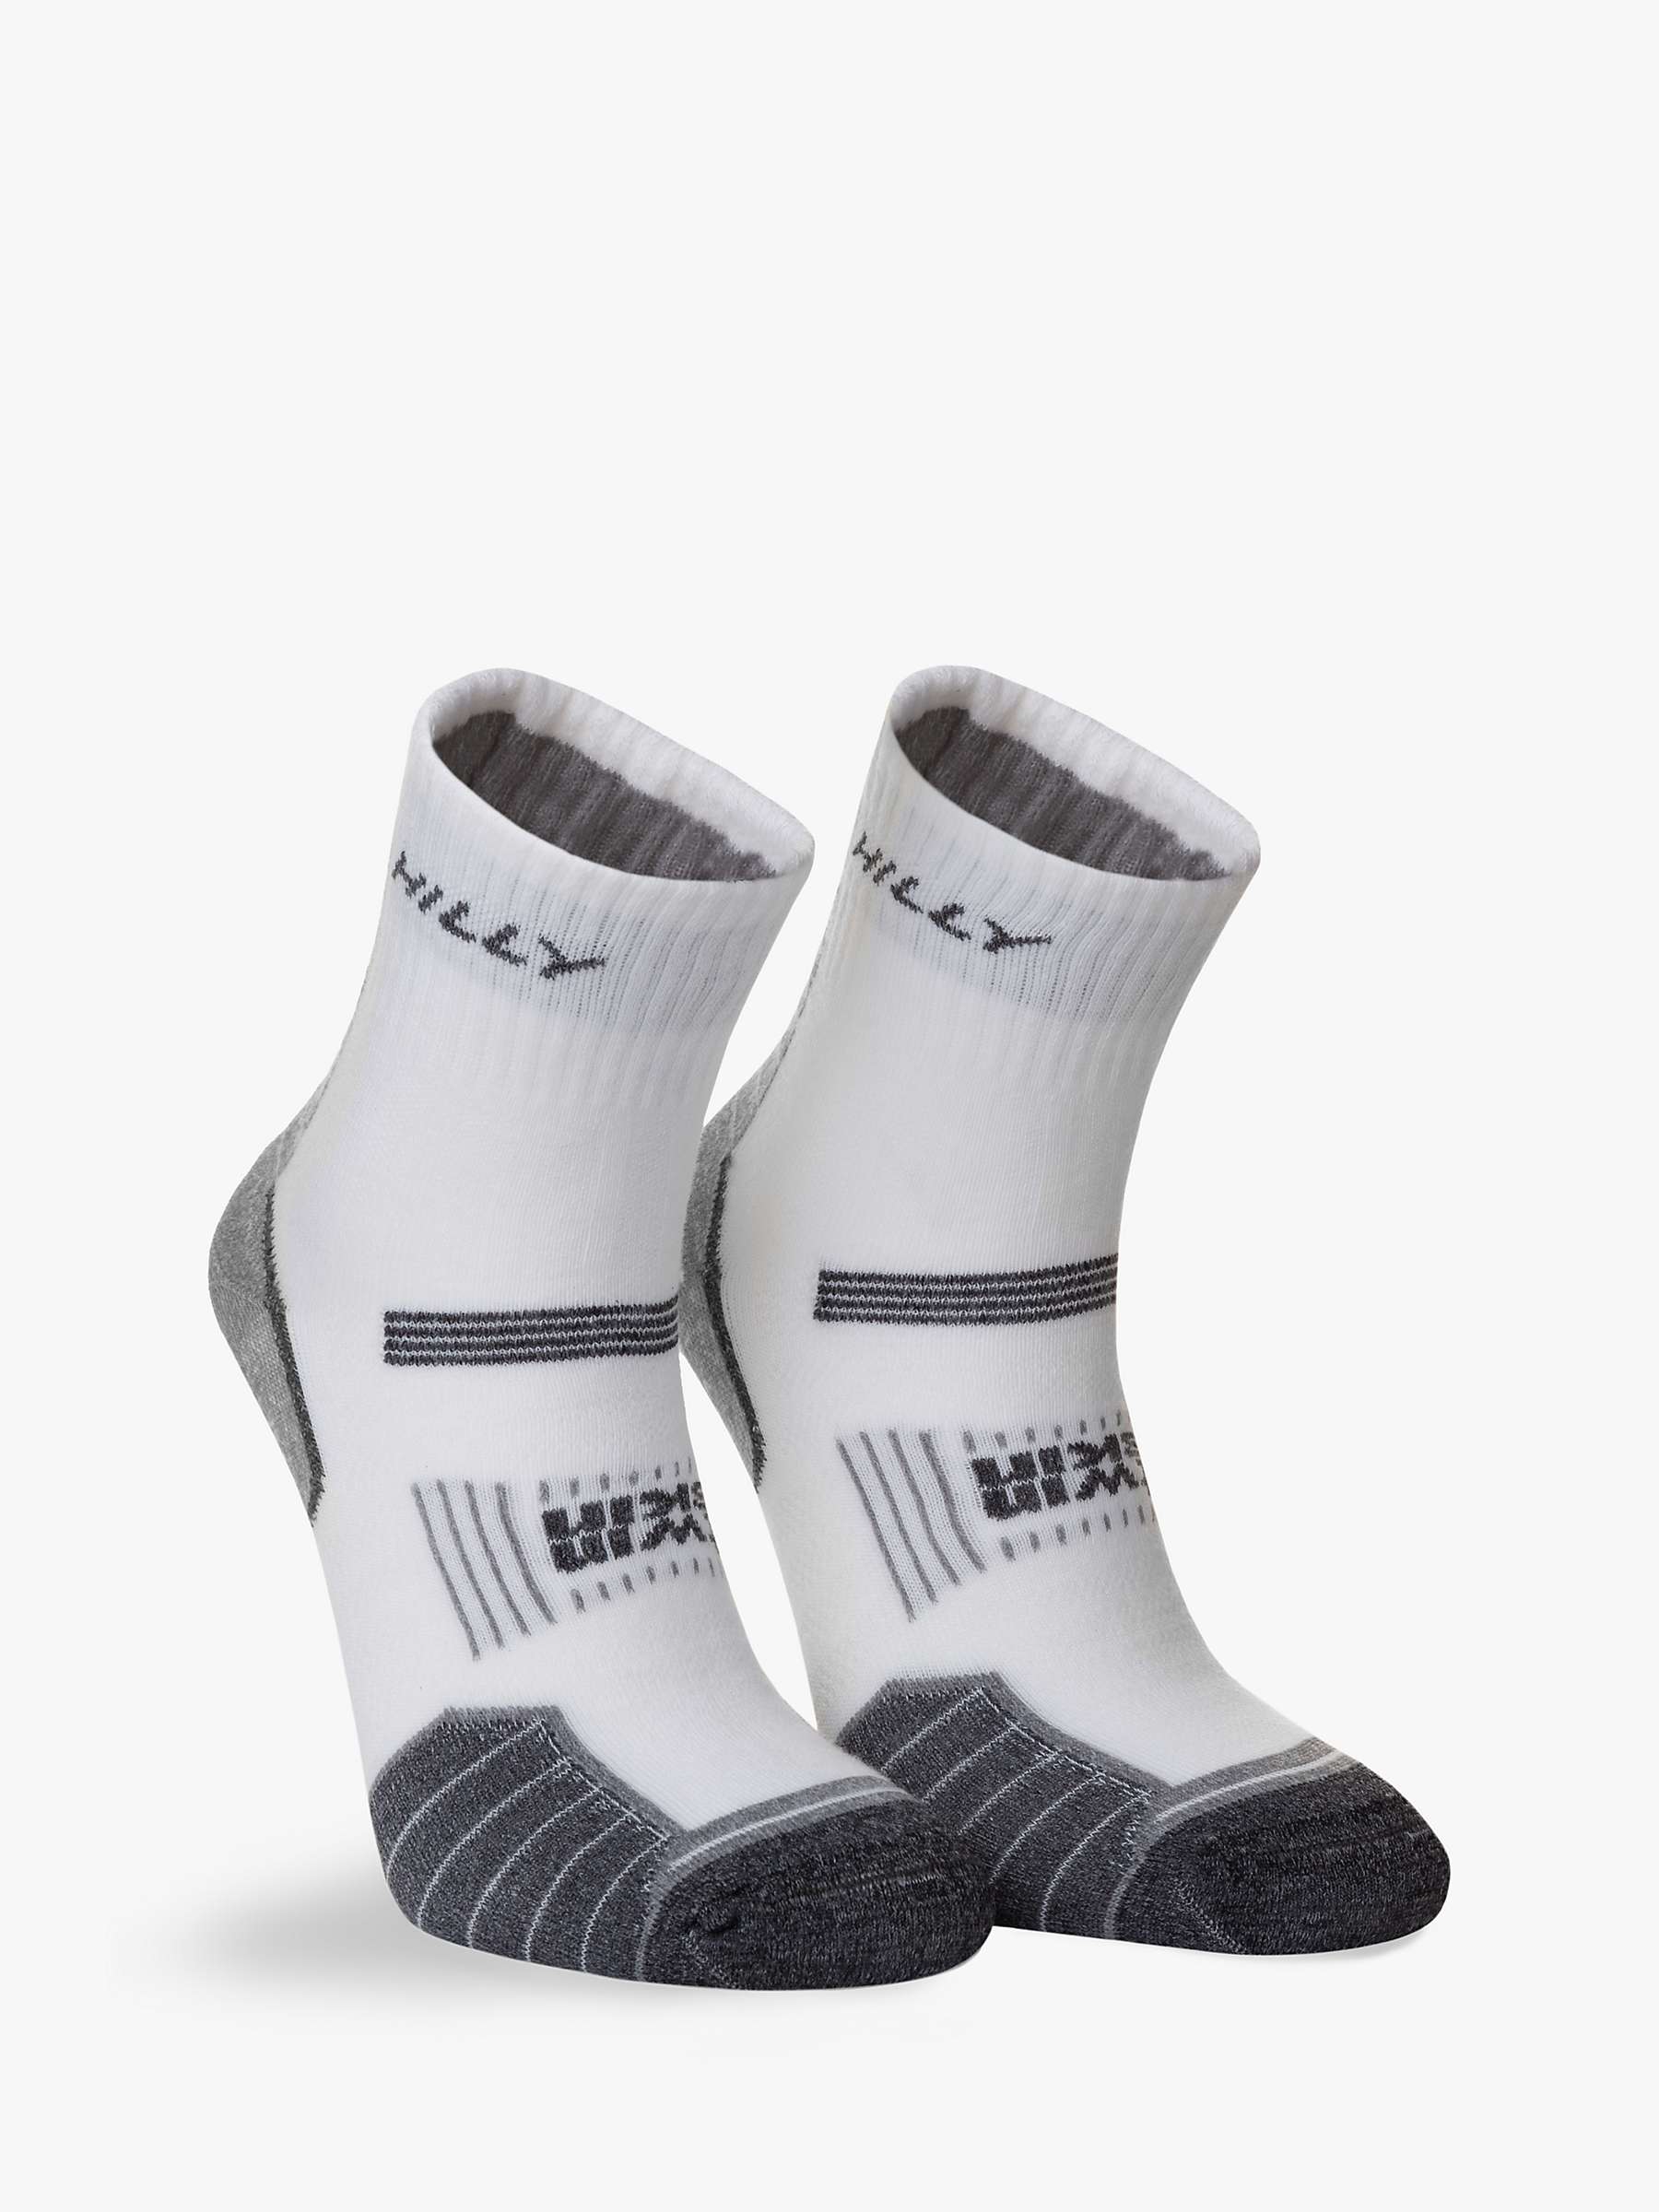 Buy Hilly Twin Skin Ankle Running Socks Online at johnlewis.com